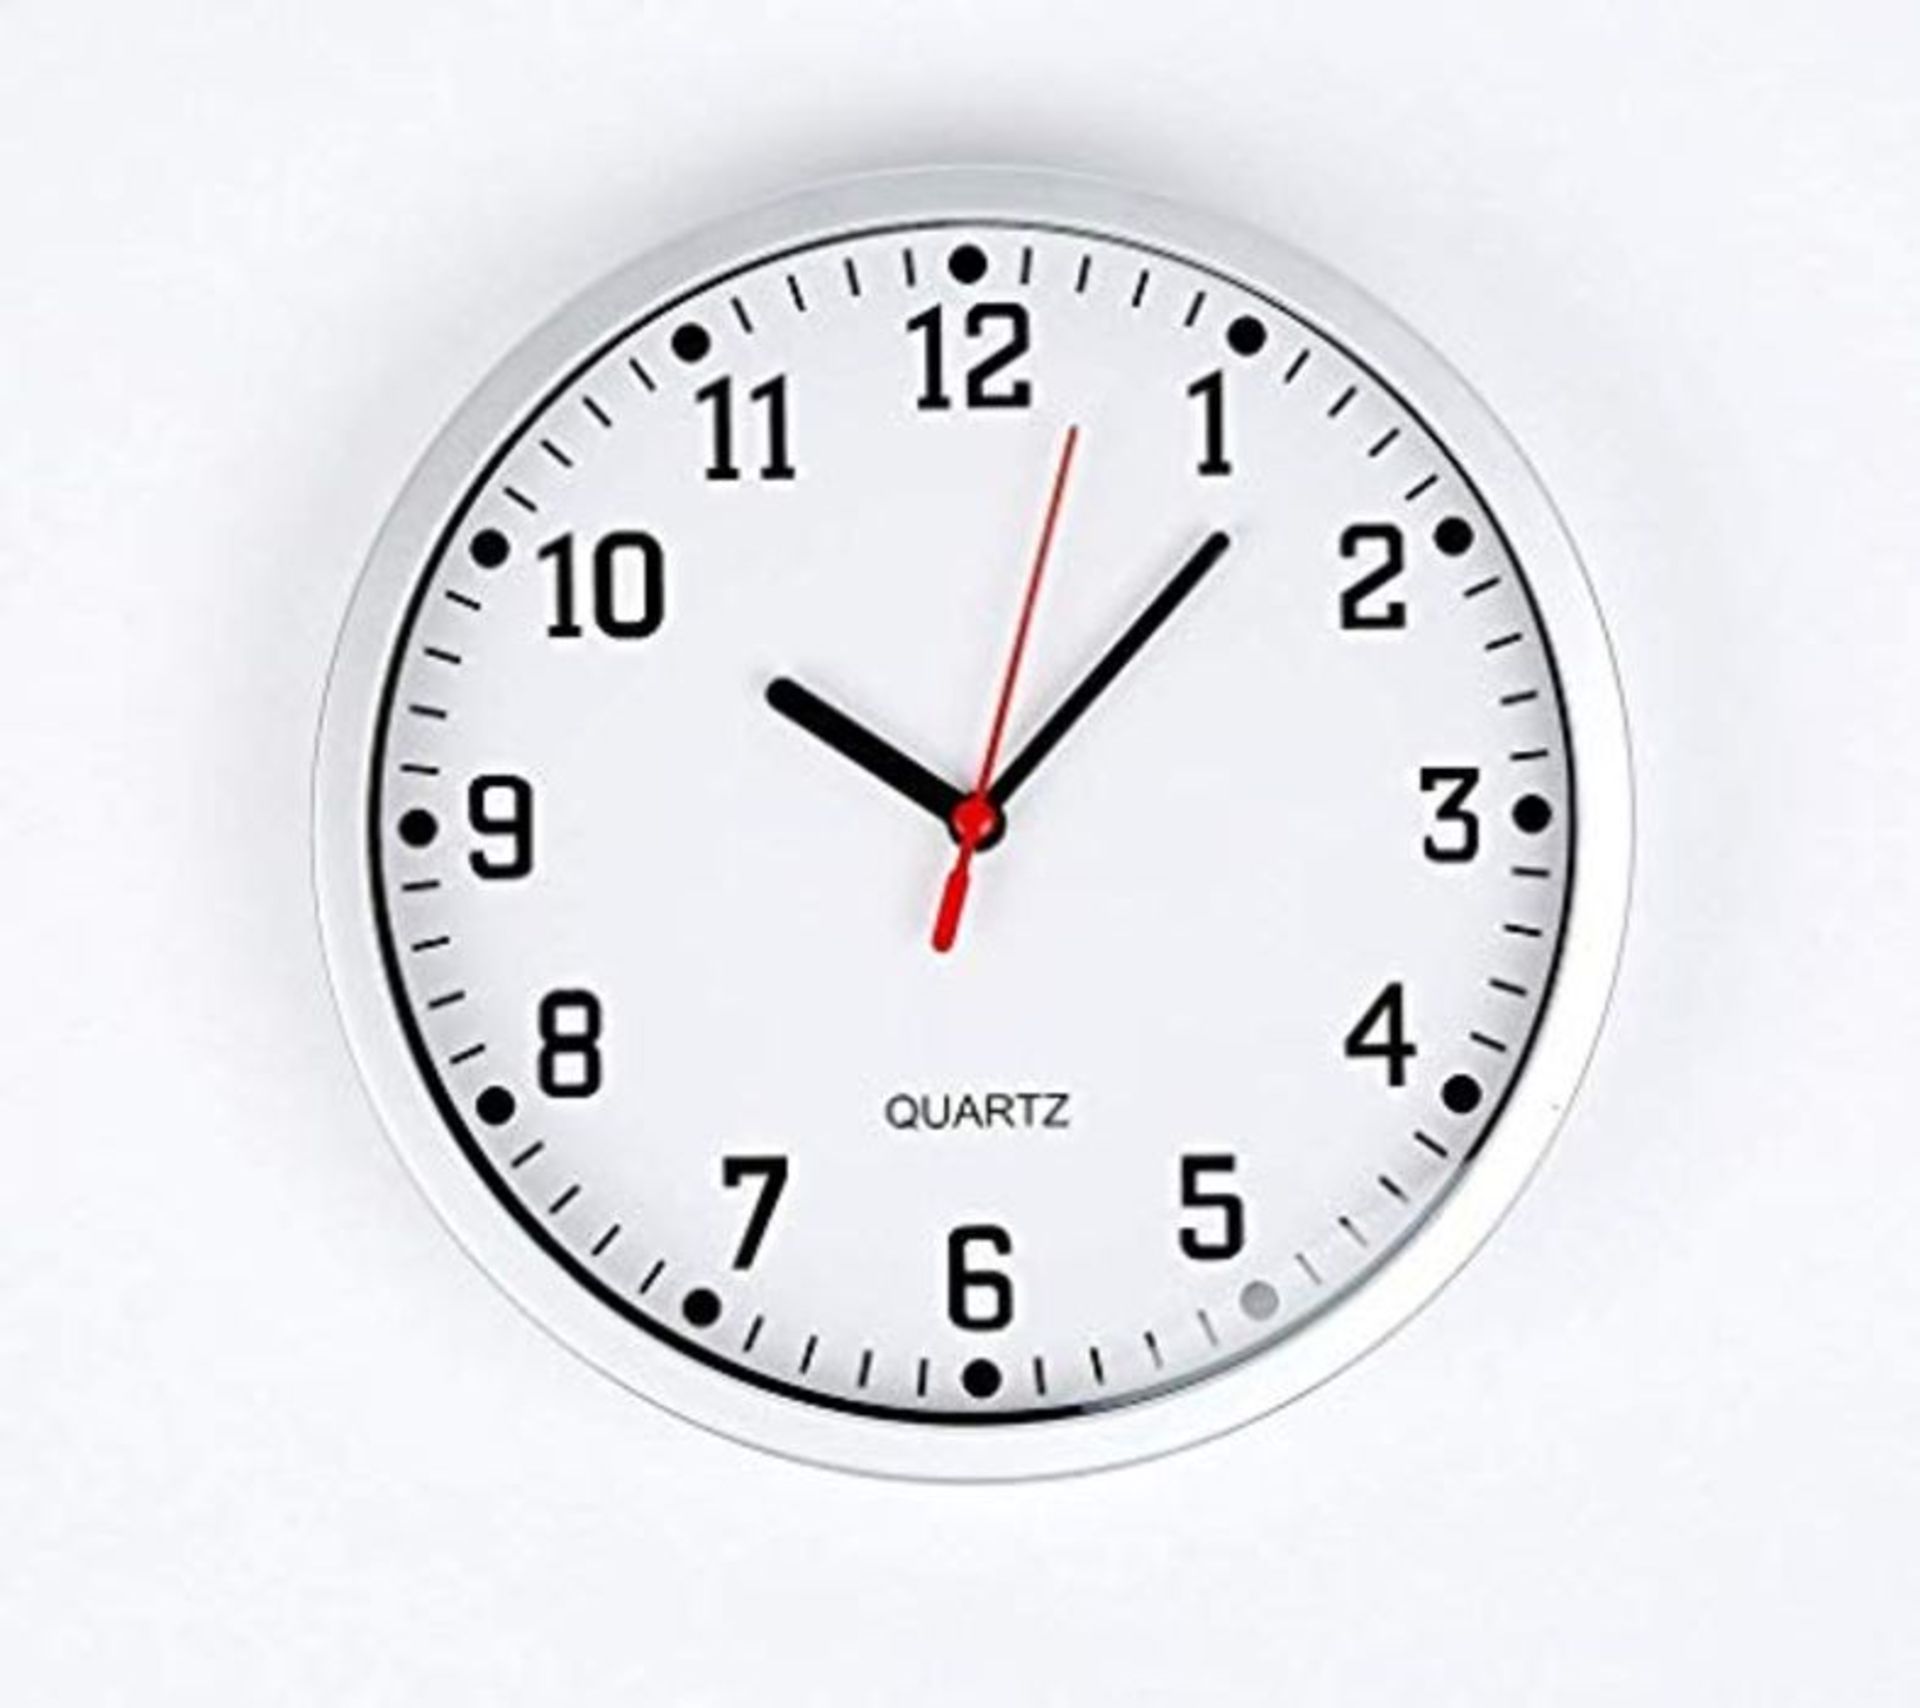 LARGE STYLISH DESIGN WALL CLOCK | EASY READABLE BIG NUMBERS | PERFECT FOR KITCHEN, REC